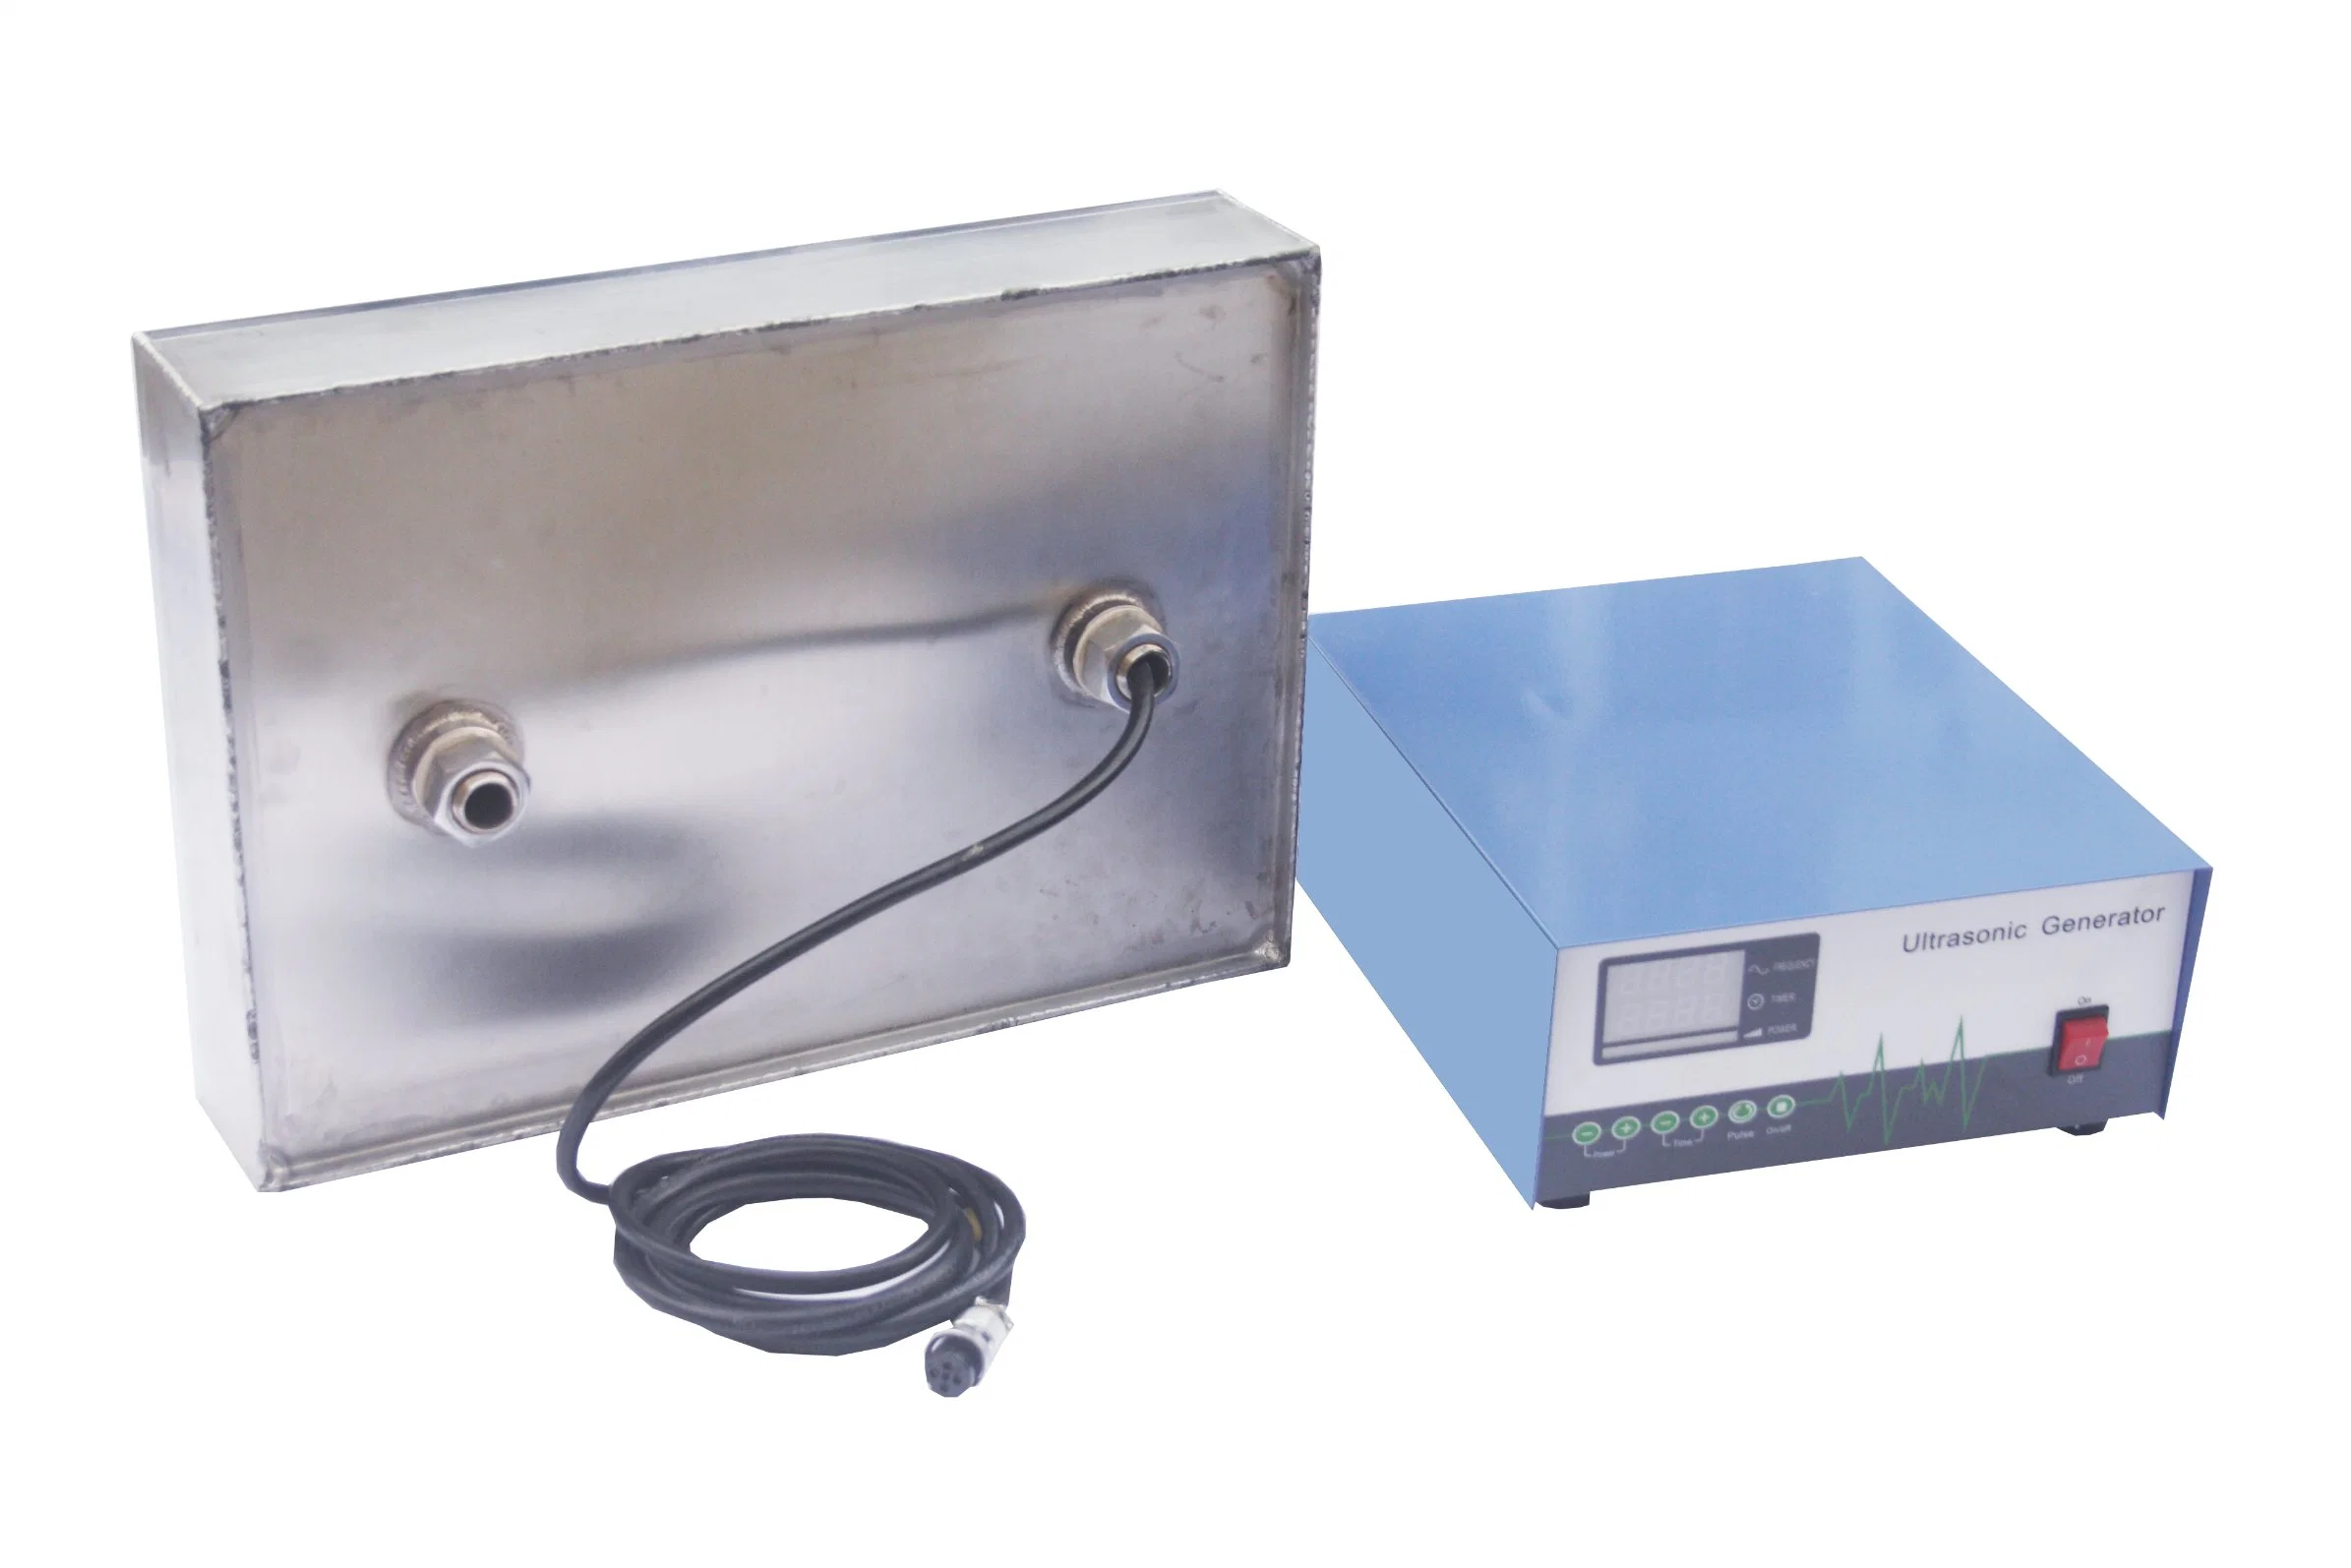 Immersible Ultrasonic Transducers From Great Ultrasonic Match Your Tank Requirement